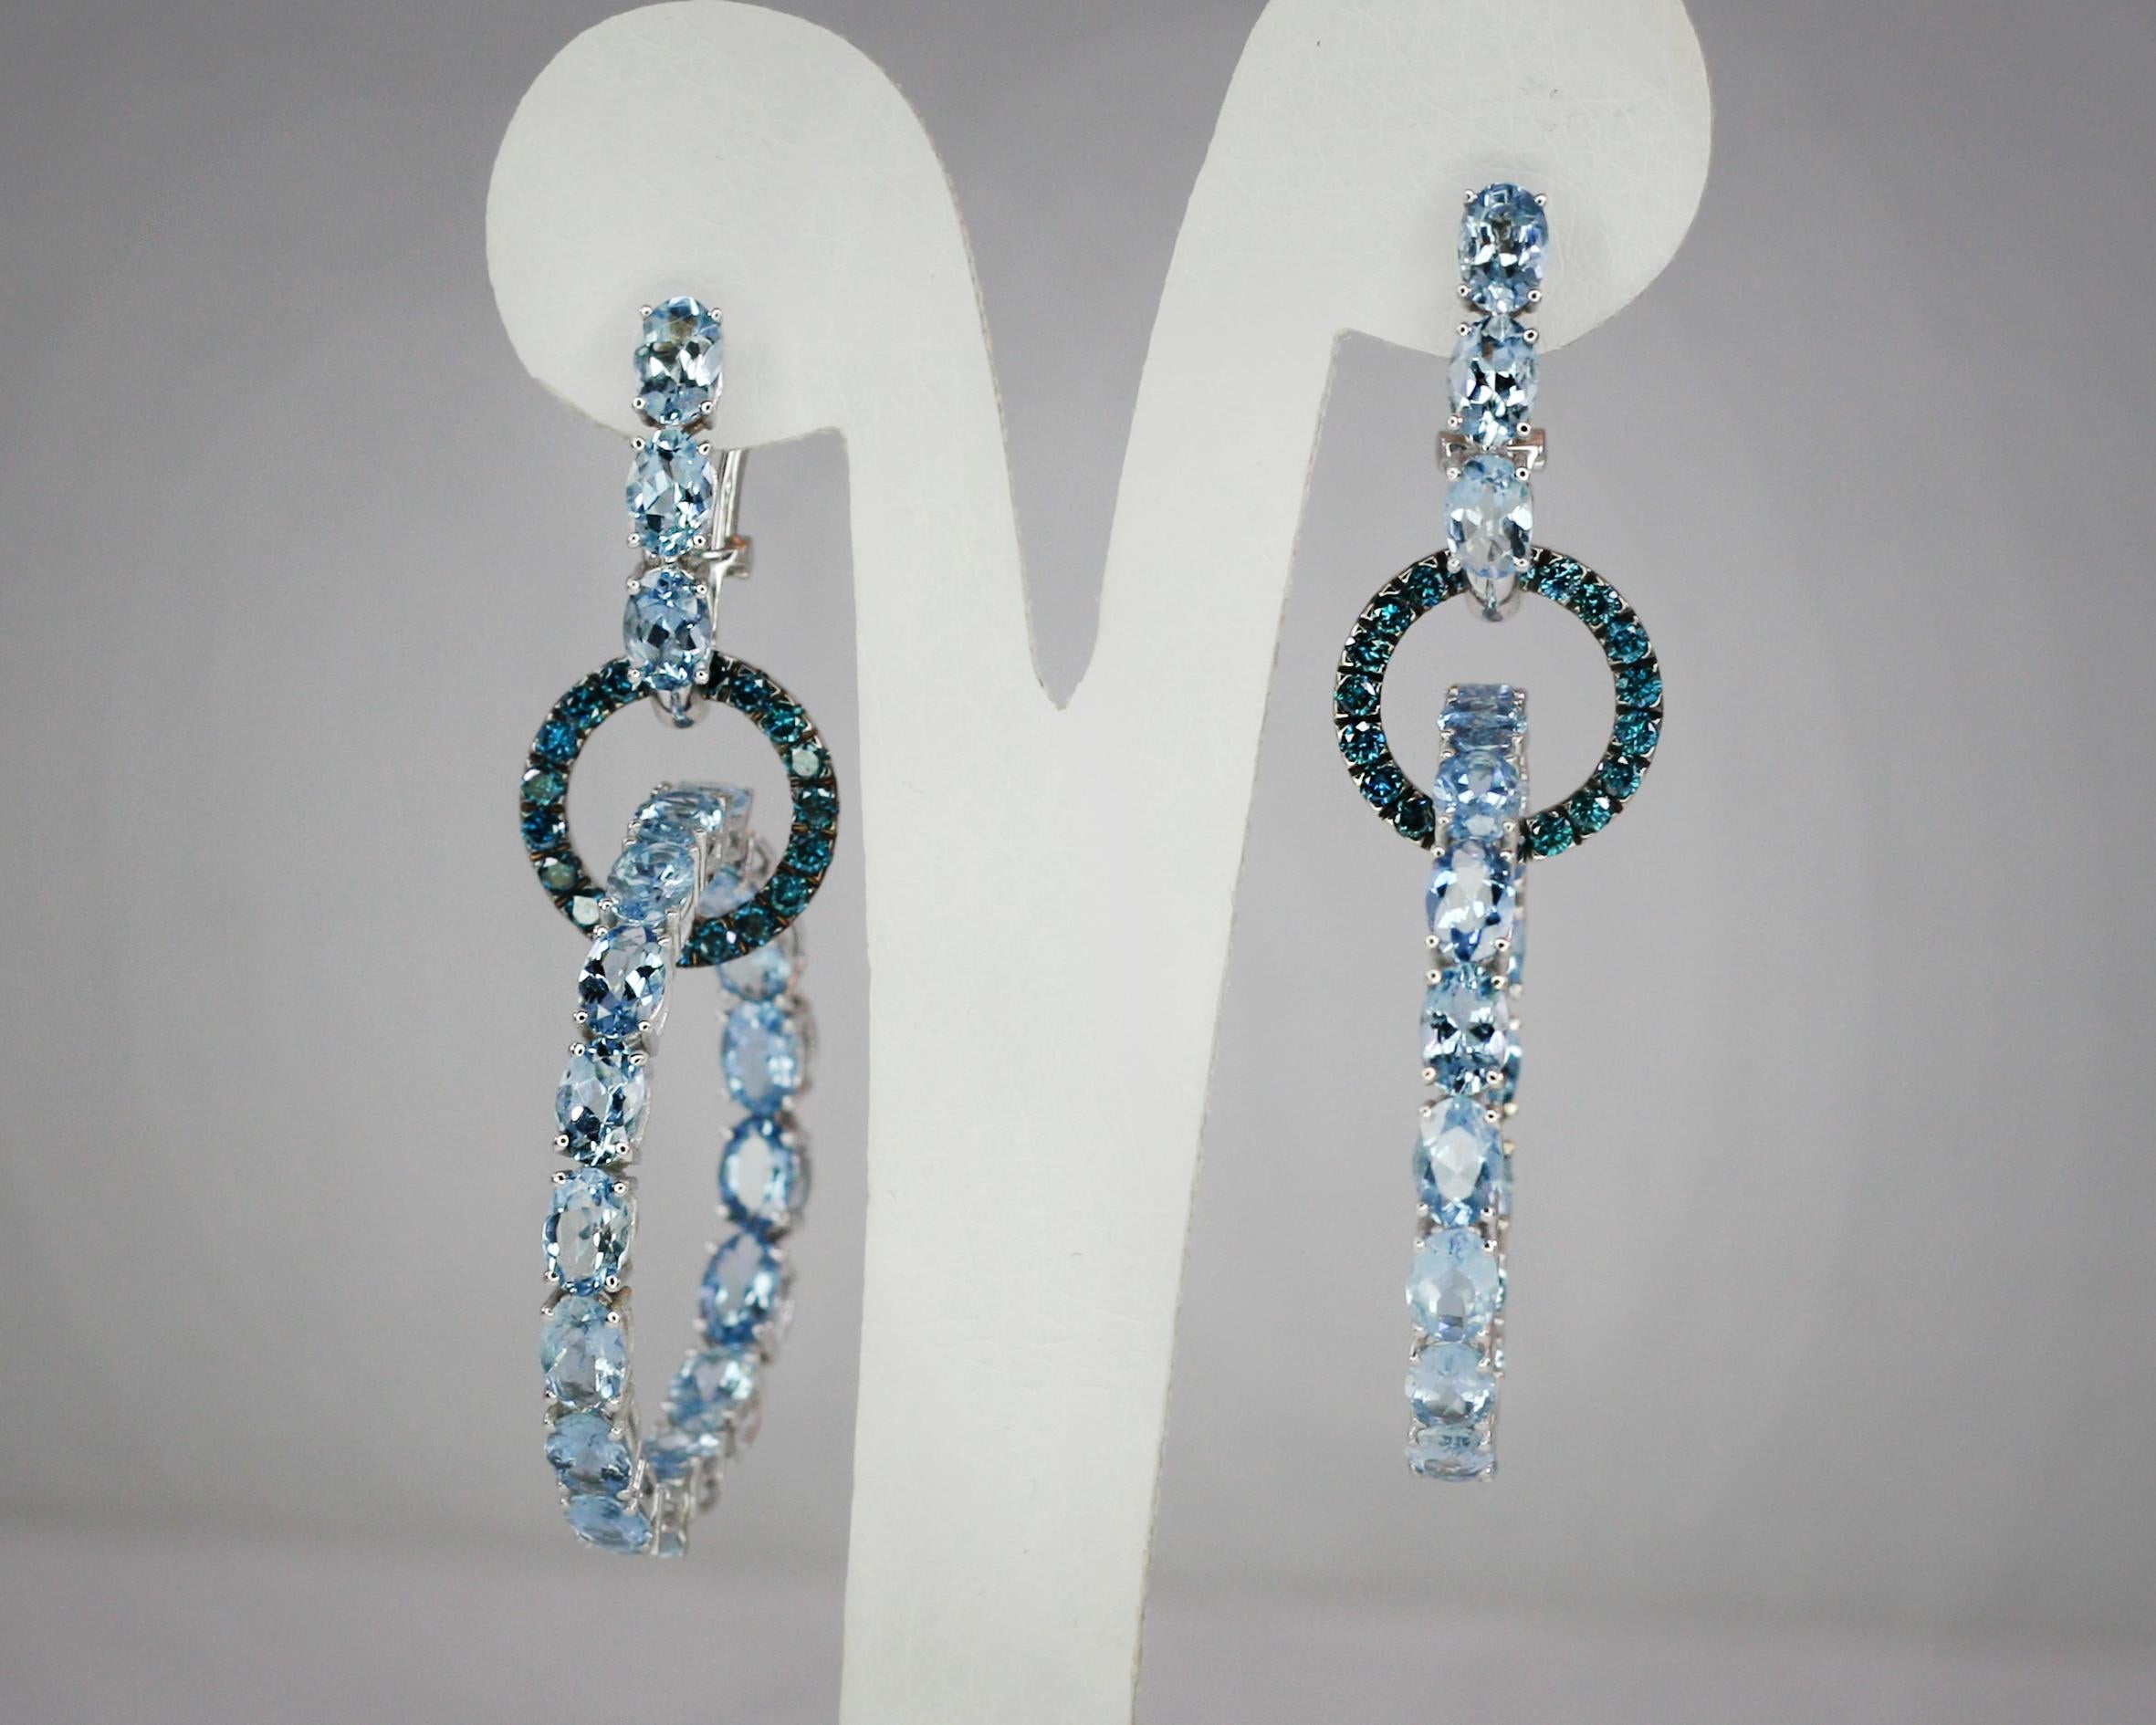 These S.Georgios designer hoop earrings in White Gold 18 Karat are all hand made with microscopic settings. These gorgeous earrings feature 2 interconnected hoops made of oval cut natural Aquamarines total weight of 16.20 Carat and brilliant-cut